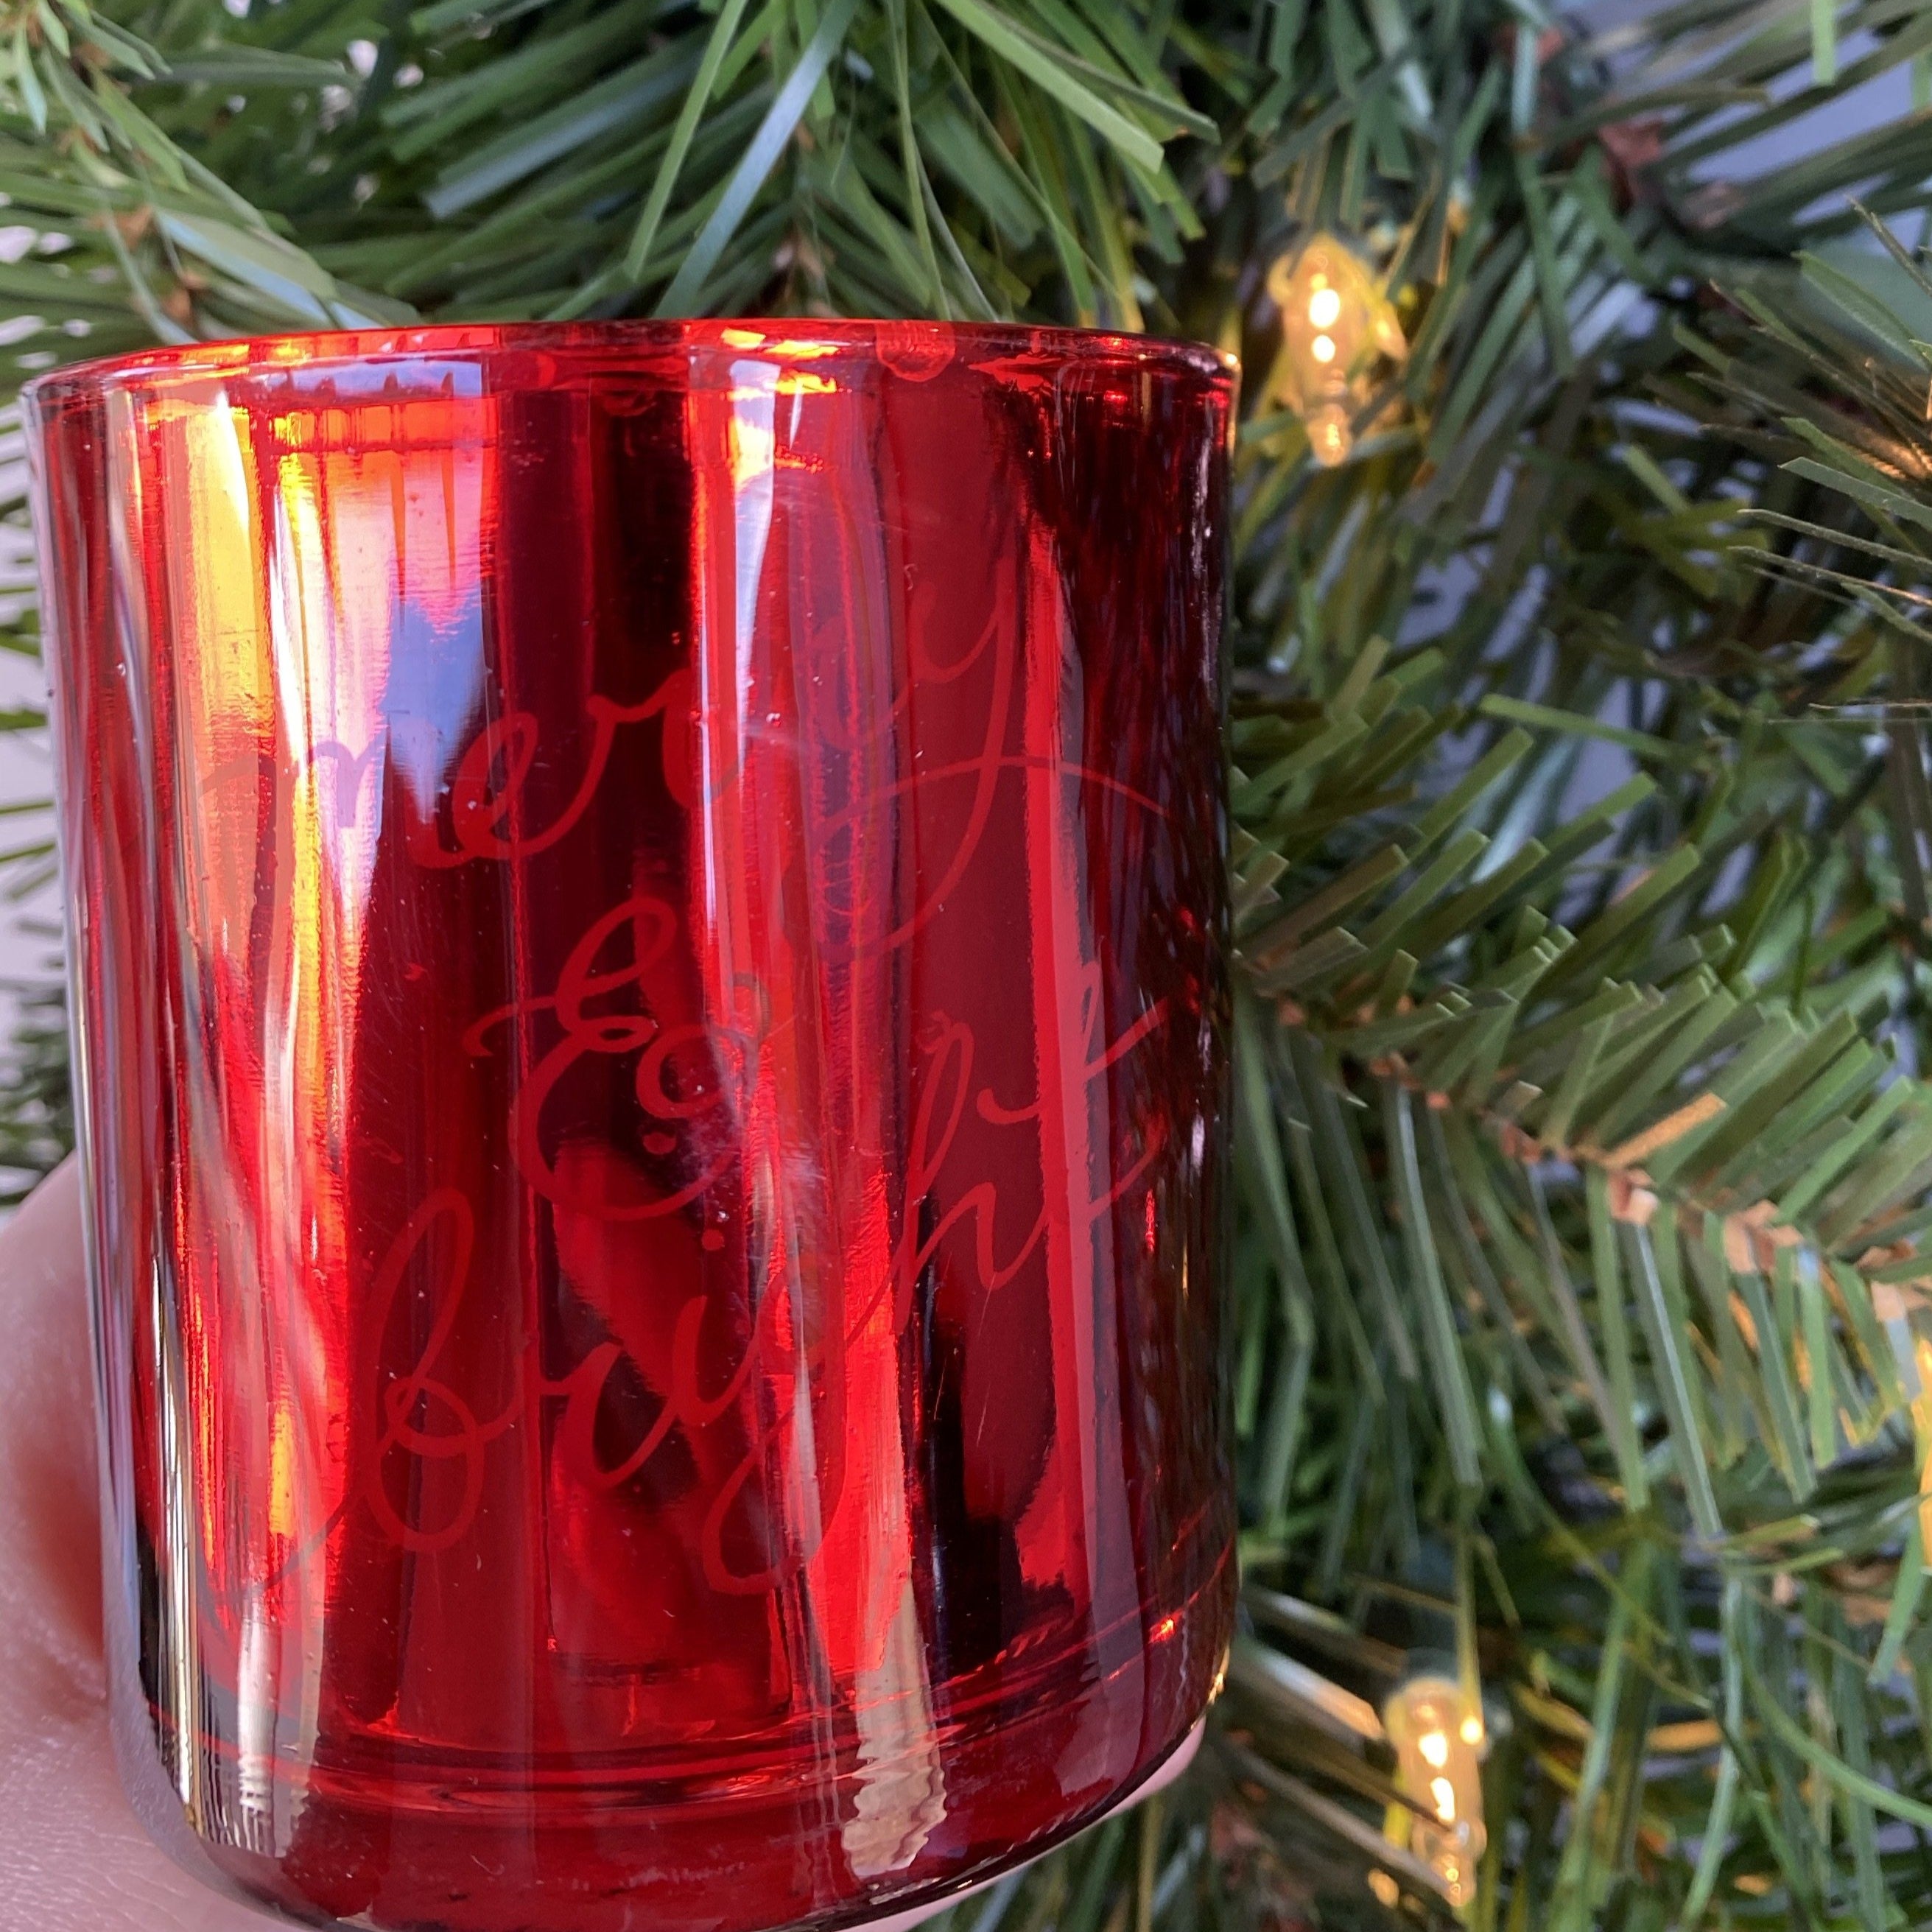 Shiny red glass candle says Merry & Bright in script